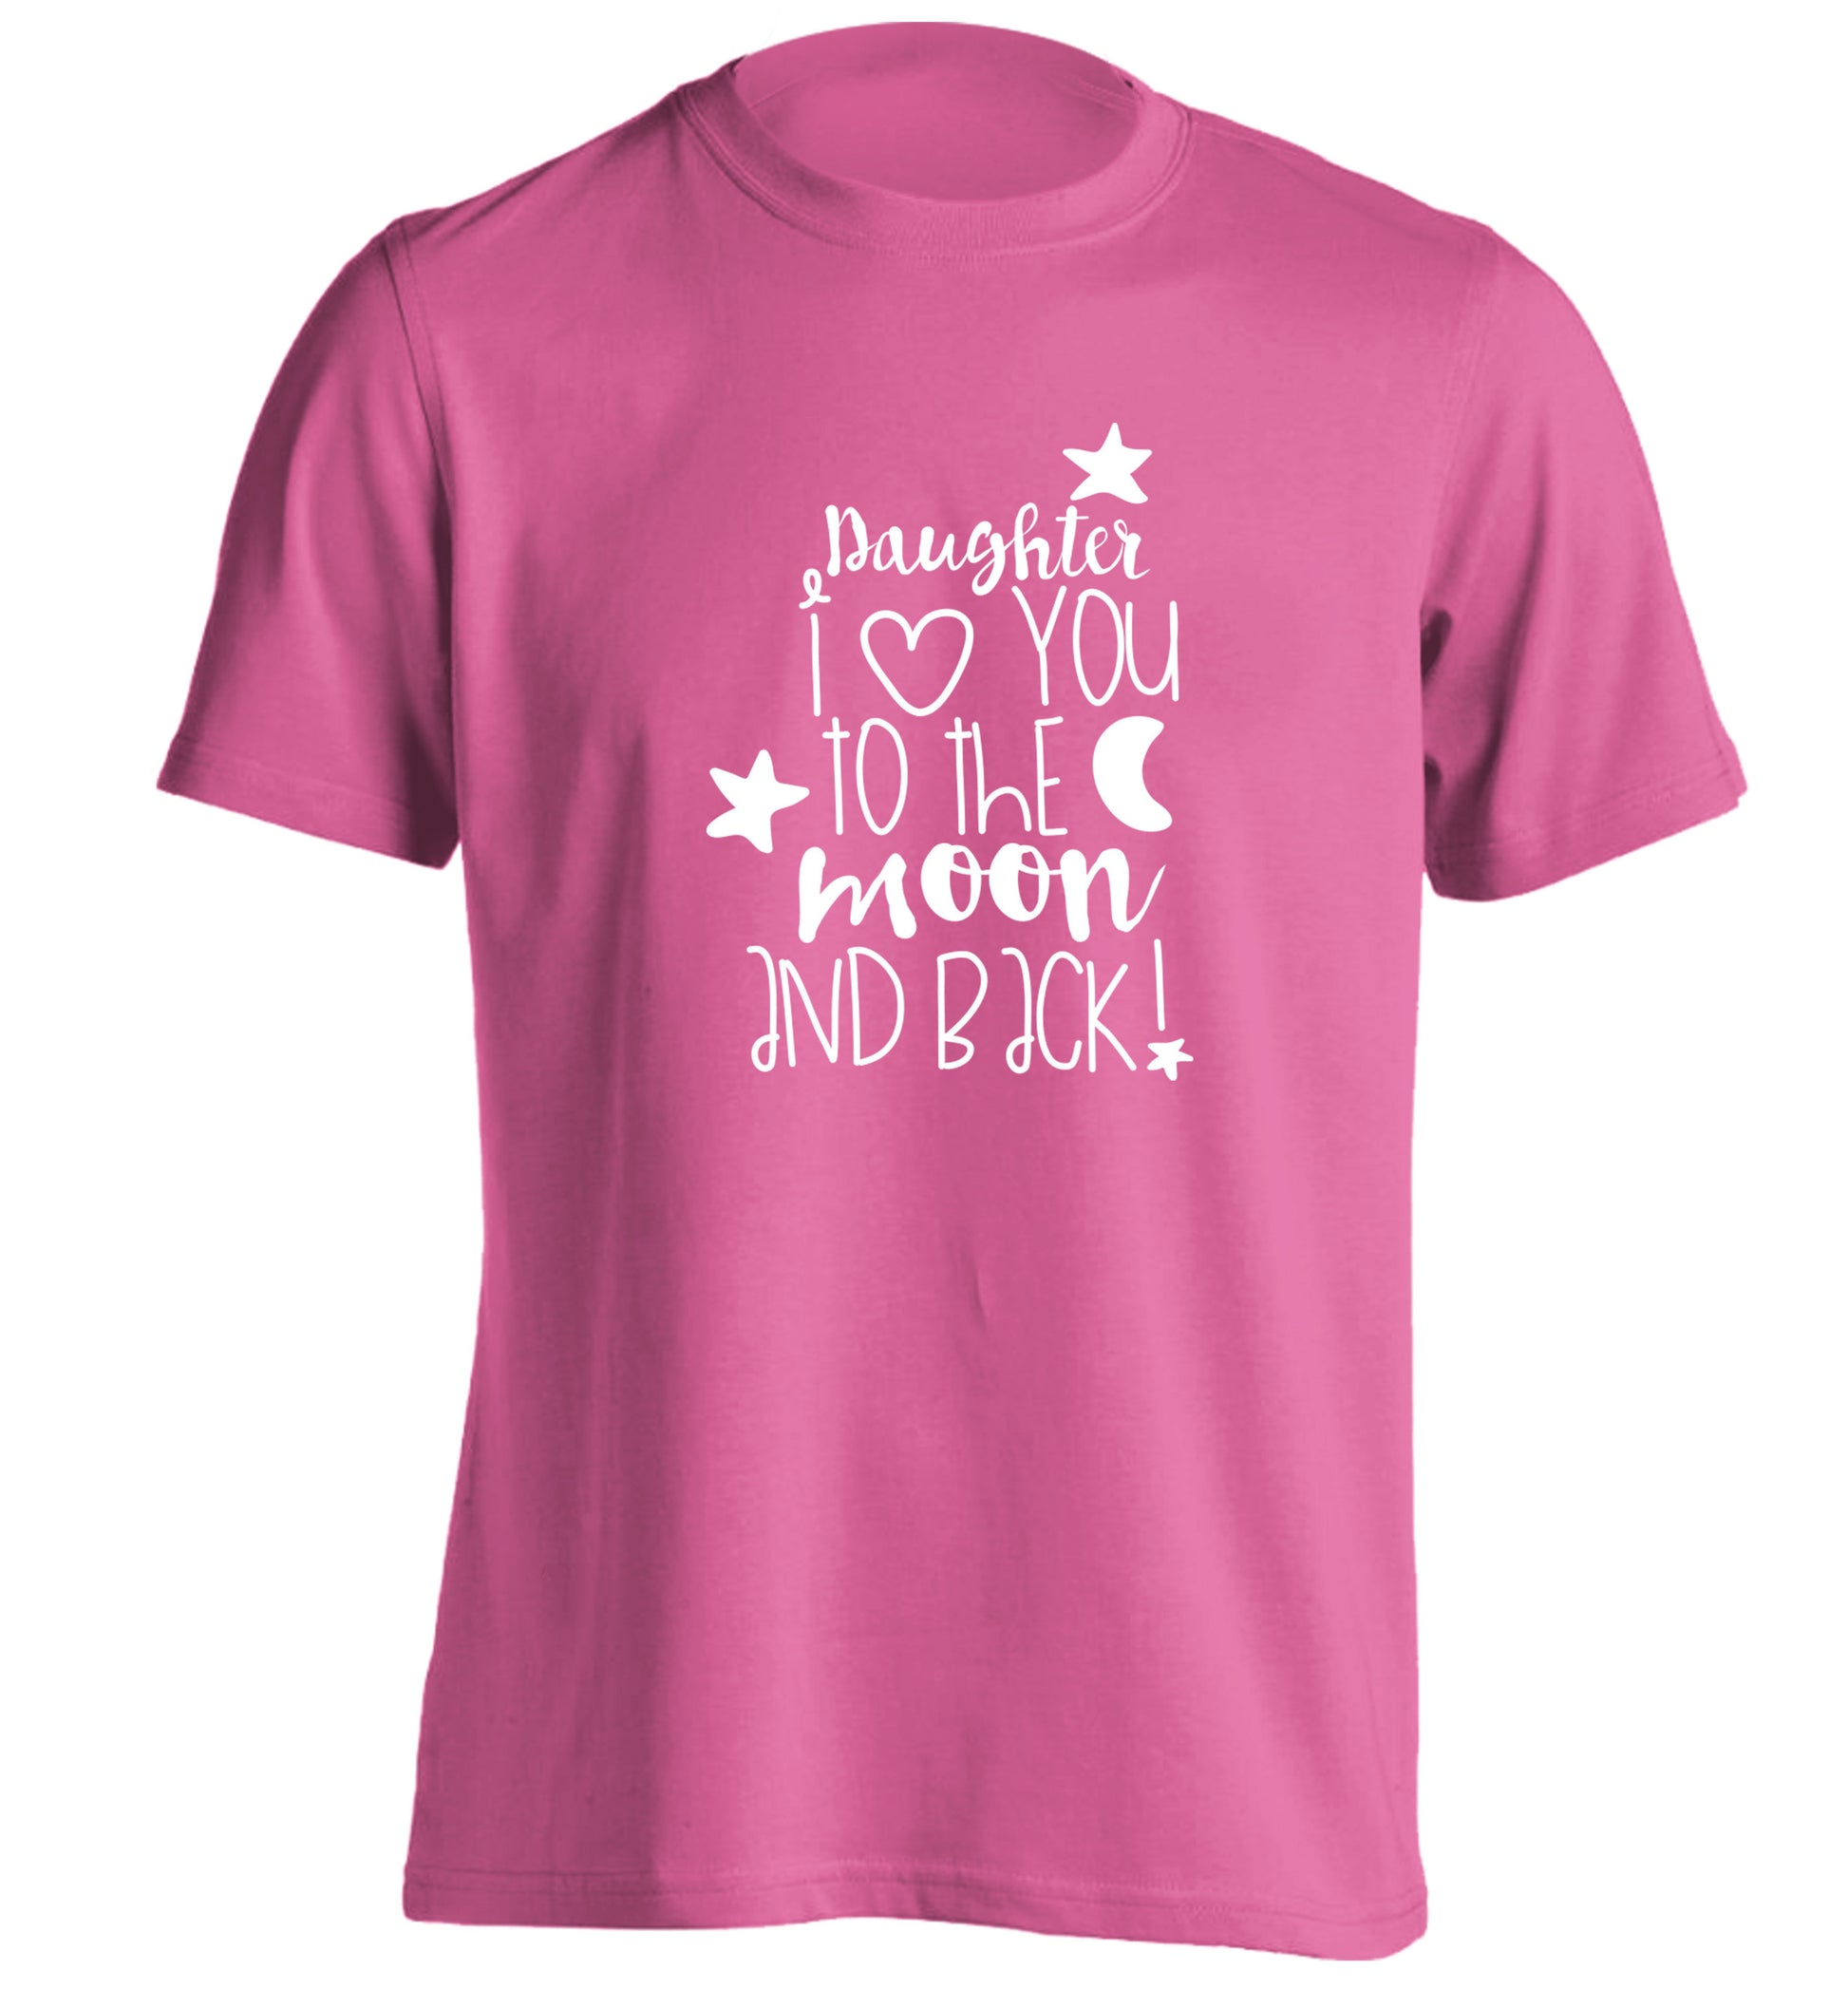 Daughter I love you to the moon and back adults unisex pink Tshirt 2XL